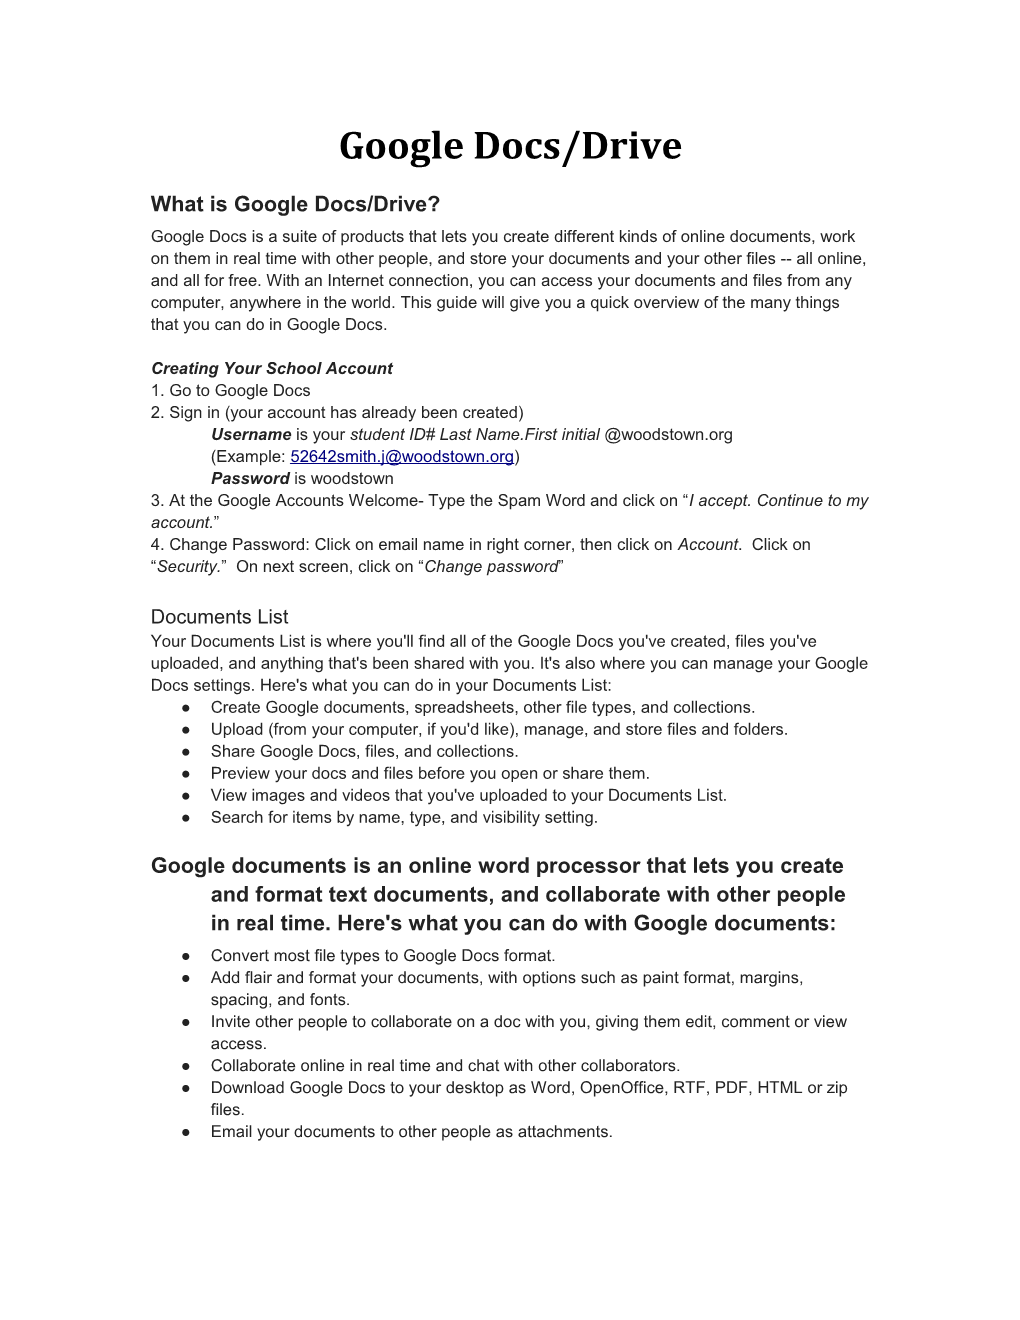 What Is Google Docs/Drive?